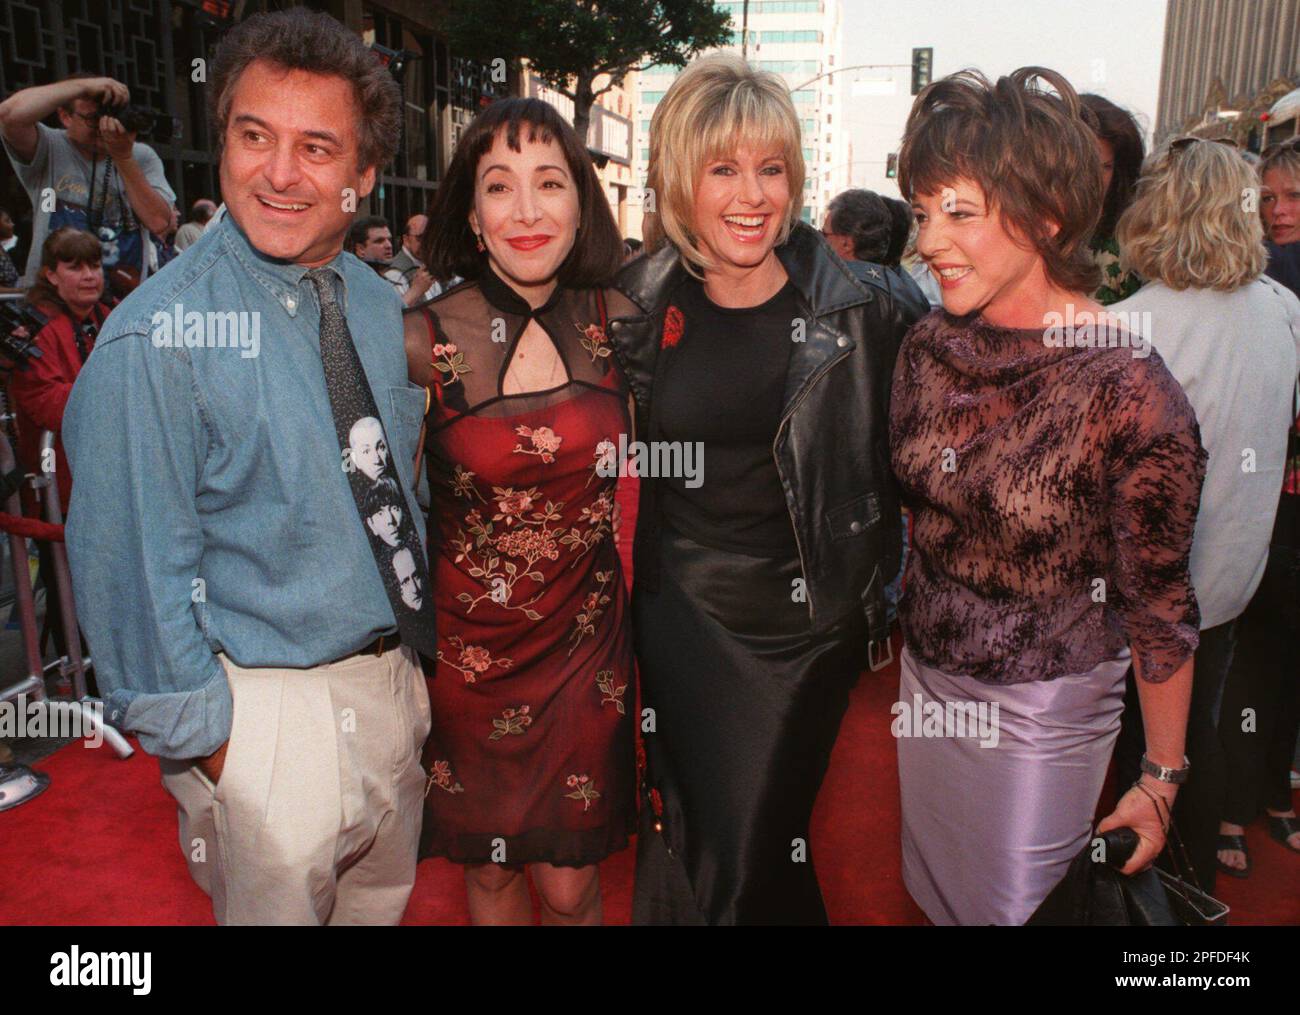 Original "Grease" movie cast members, from left, Barry Pearl ("Doody"), Didi Conn ("Frenchy"), Olivia Newton-John ("Sandy"), and Stockard Channing ("Rizzo"), pose during the 20th anniversary re-release premiere of "Grease" outside Mann's Chinese Theatre in Los Angeles Sunday, March 15, 1998. (AP Photo/E.J. Flynn) Stock Photo